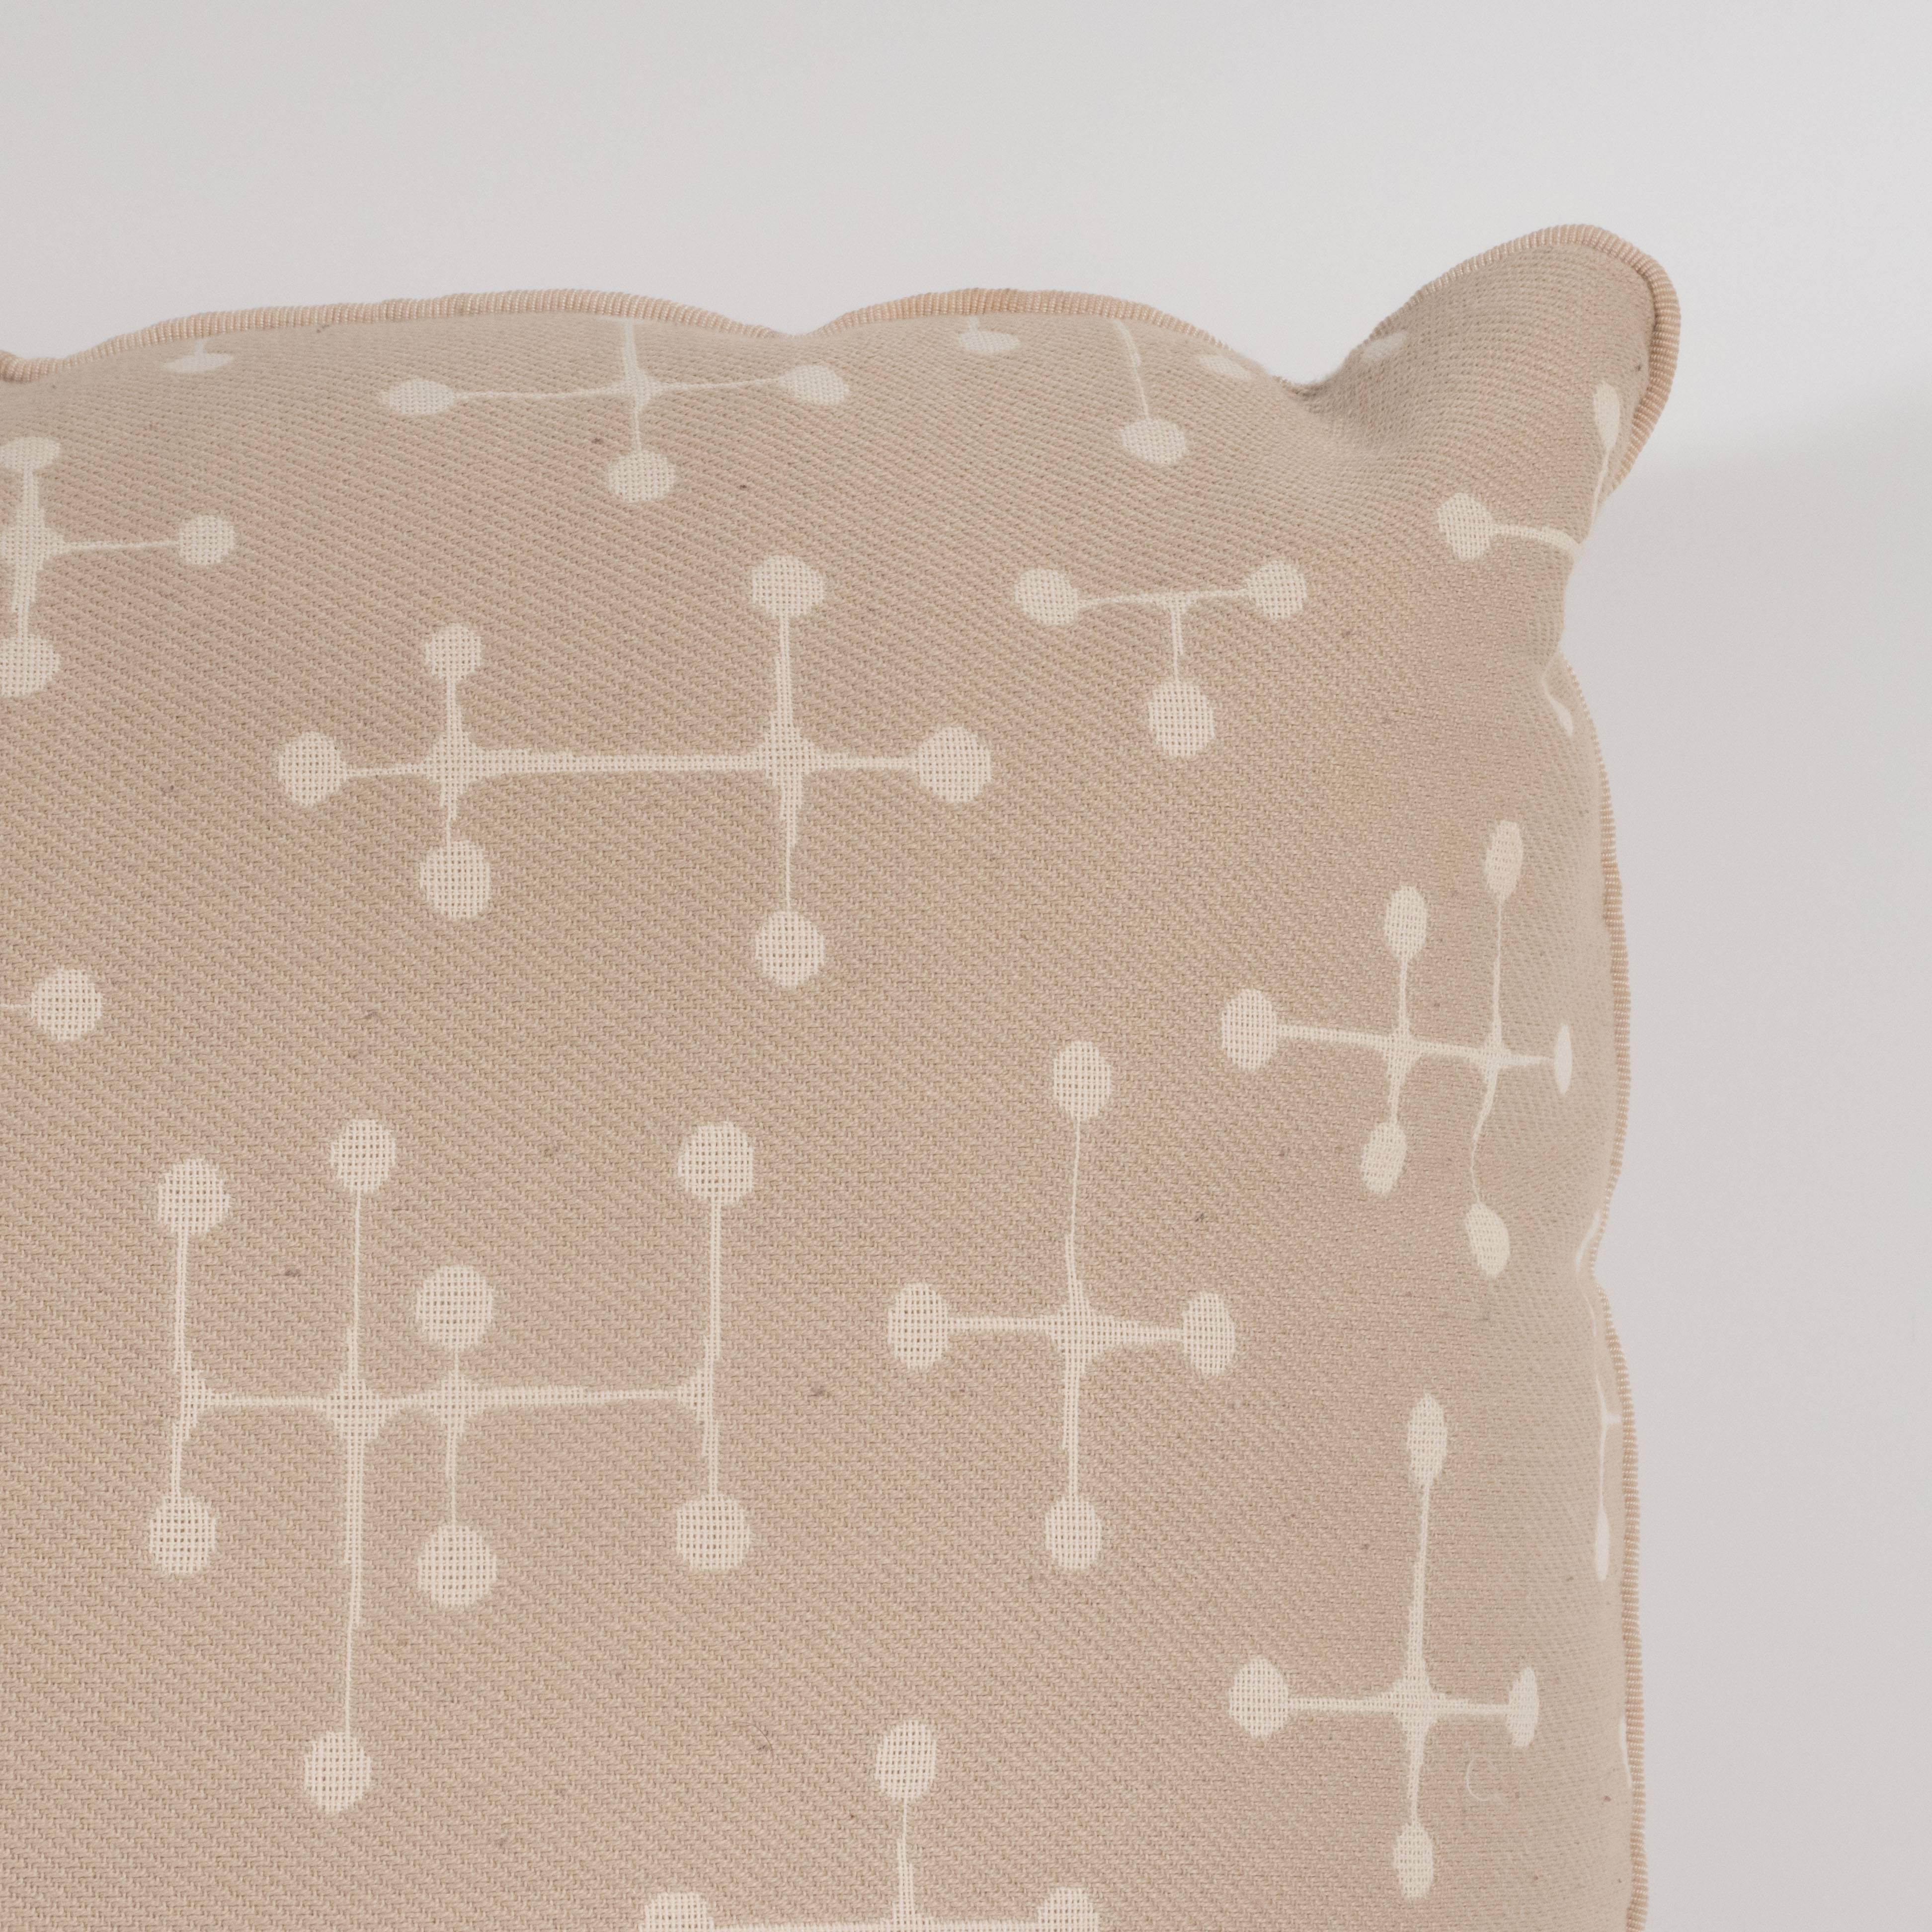 American Set of Four Modern Beige Cotton Twill Pillows with Geometric Jacks Motif For Sale